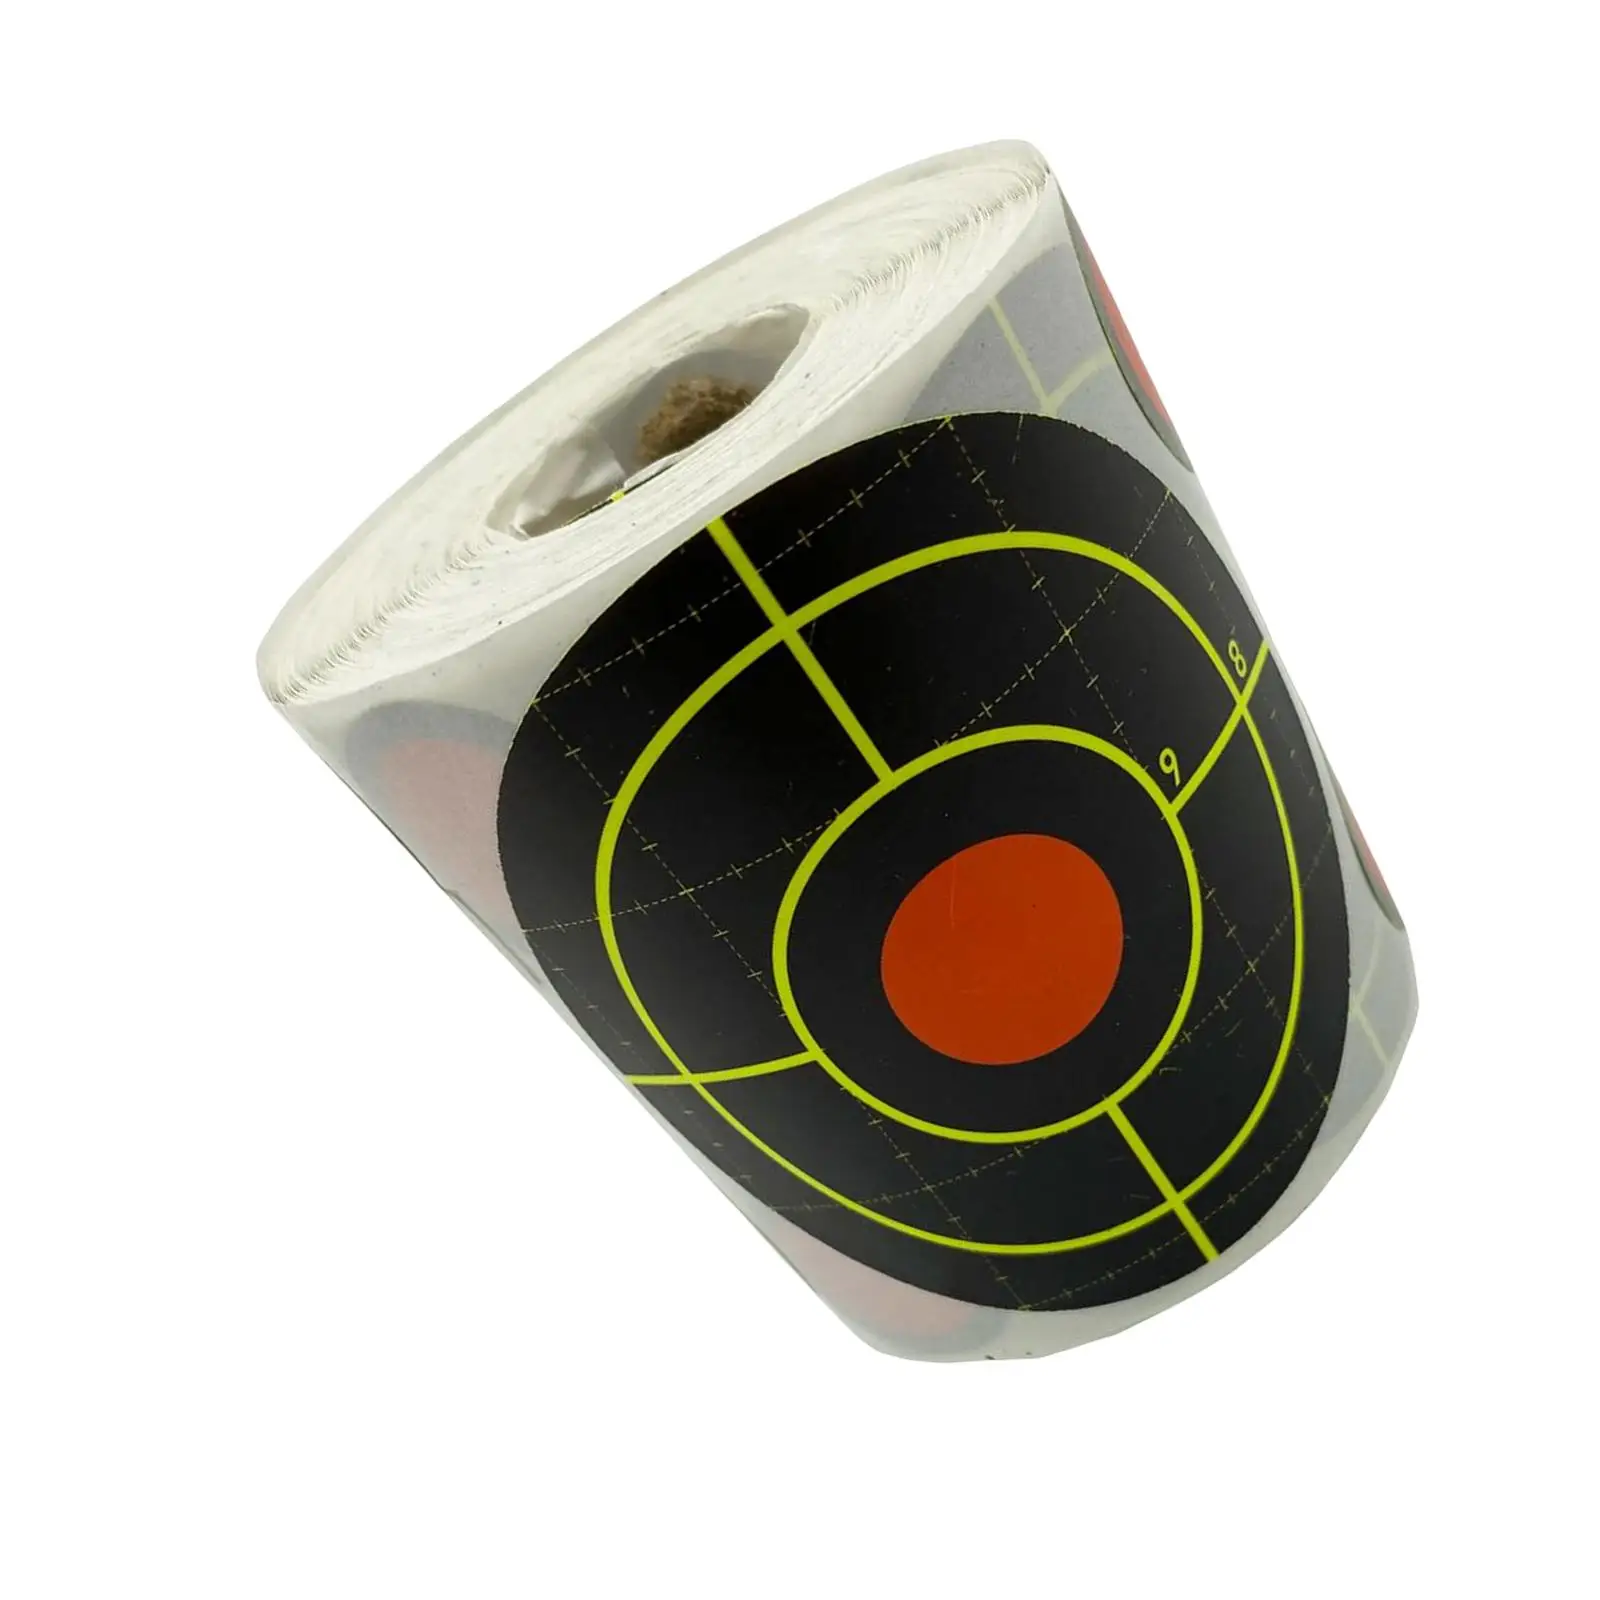 200Pcs 3Inches Shooting Targets Adhesive Target Sticker Hunting Targets